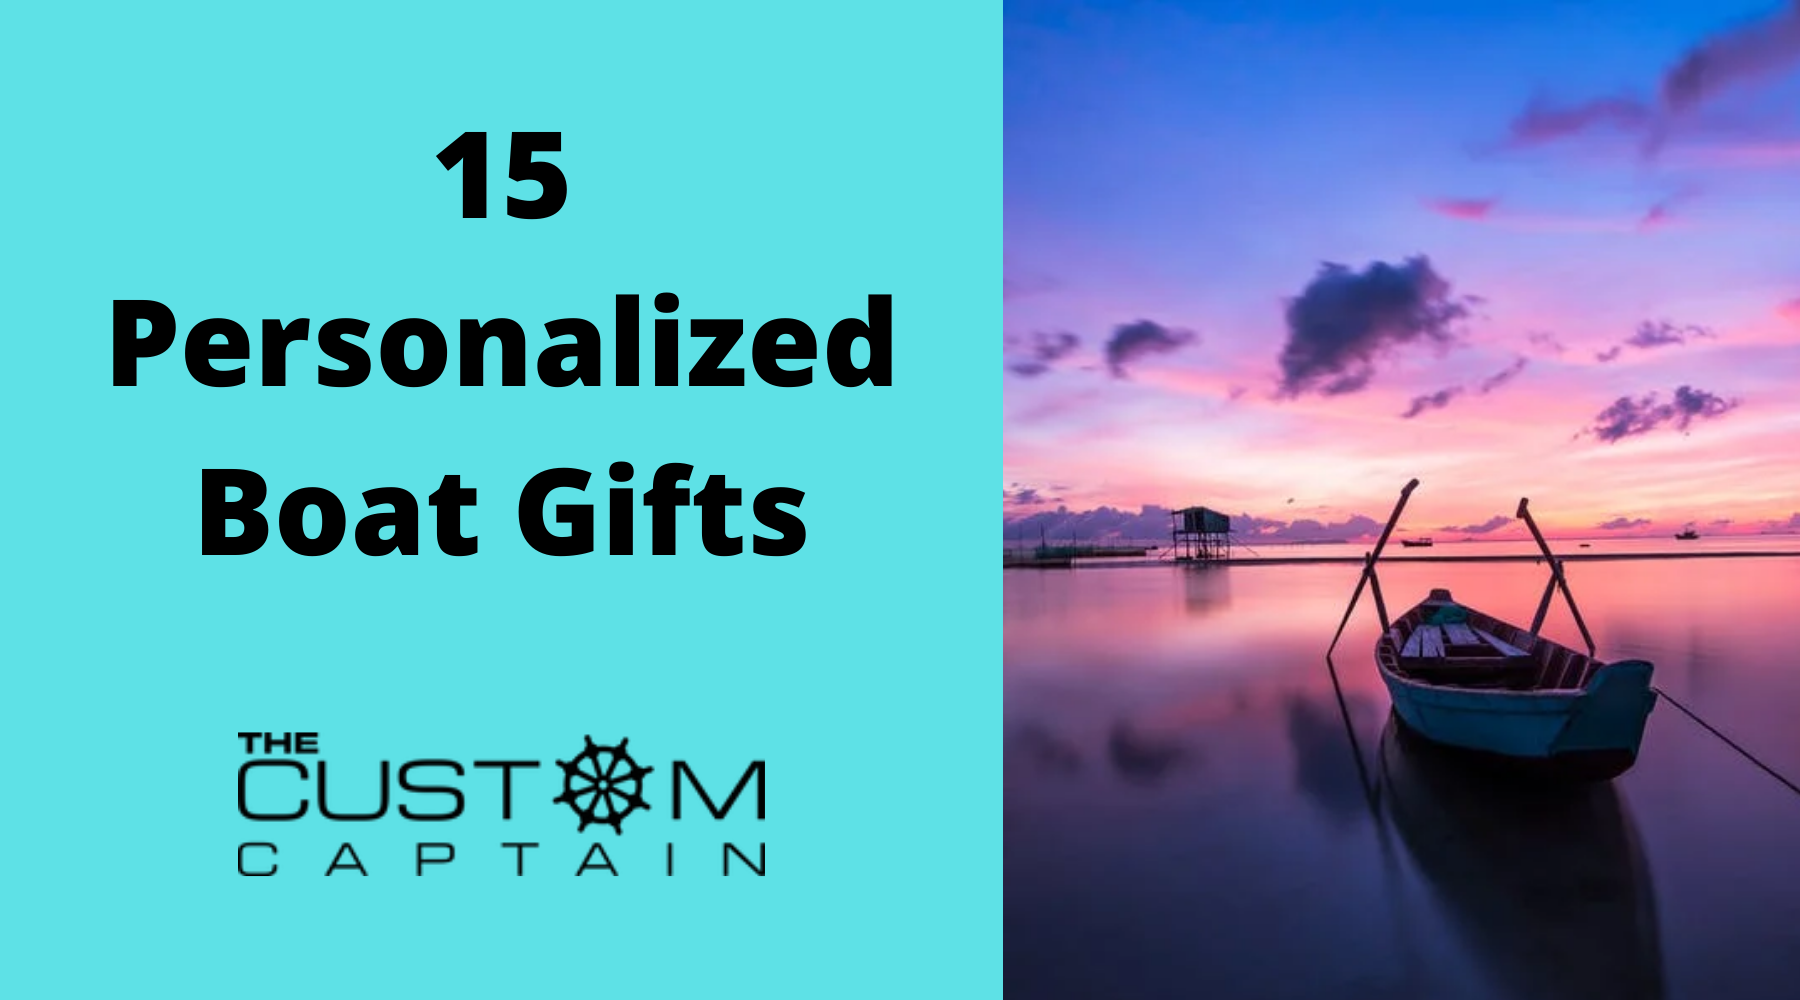 15 Personalized Boat Gifts